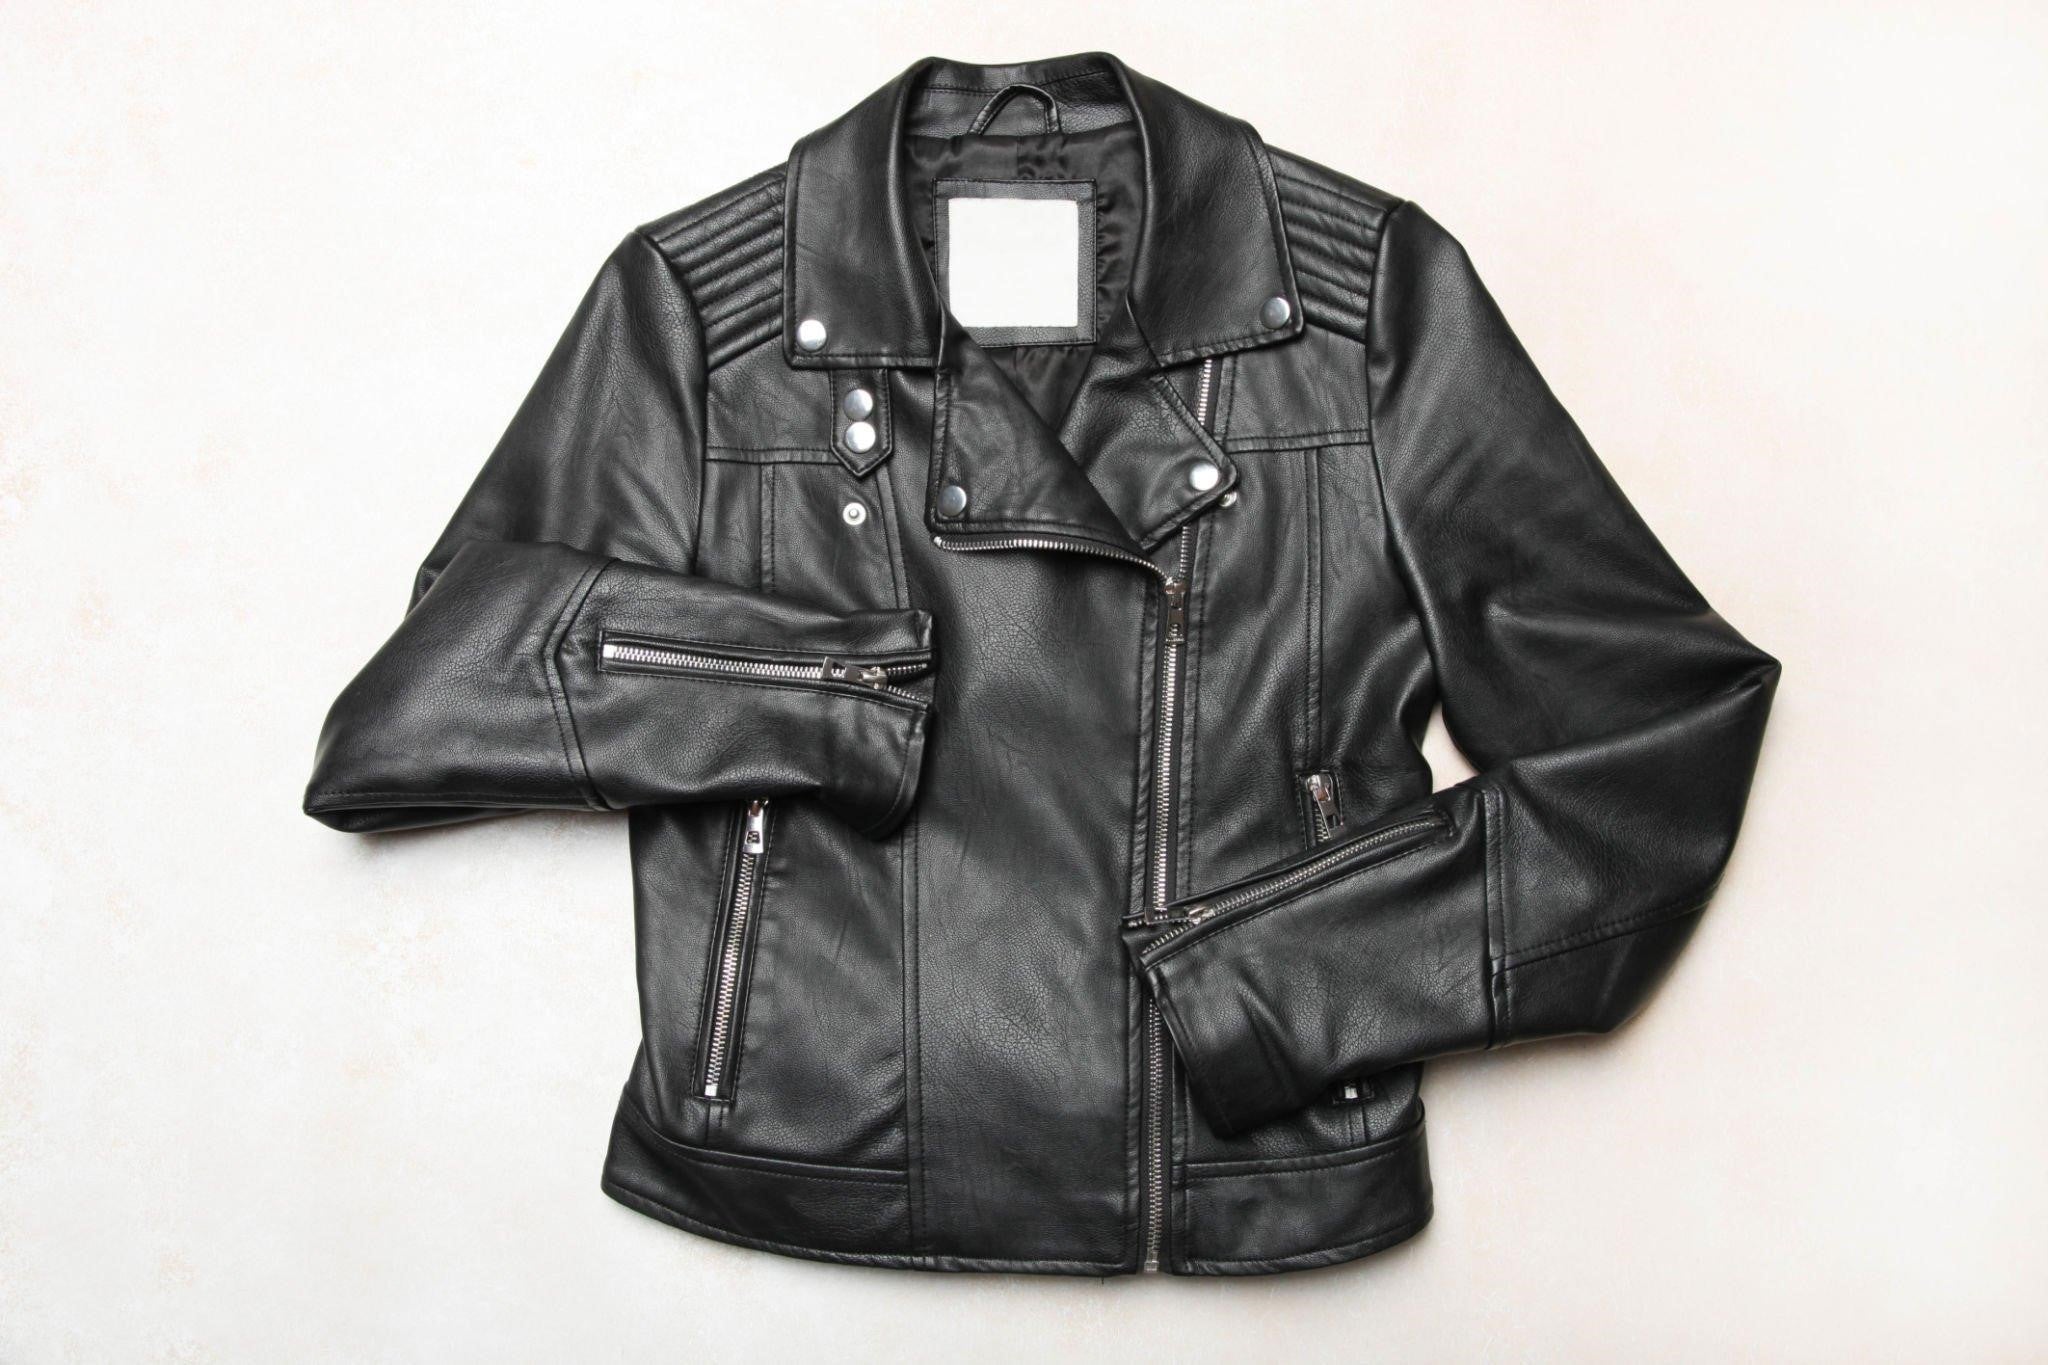 How to customize a made-to-measure leather jacket?